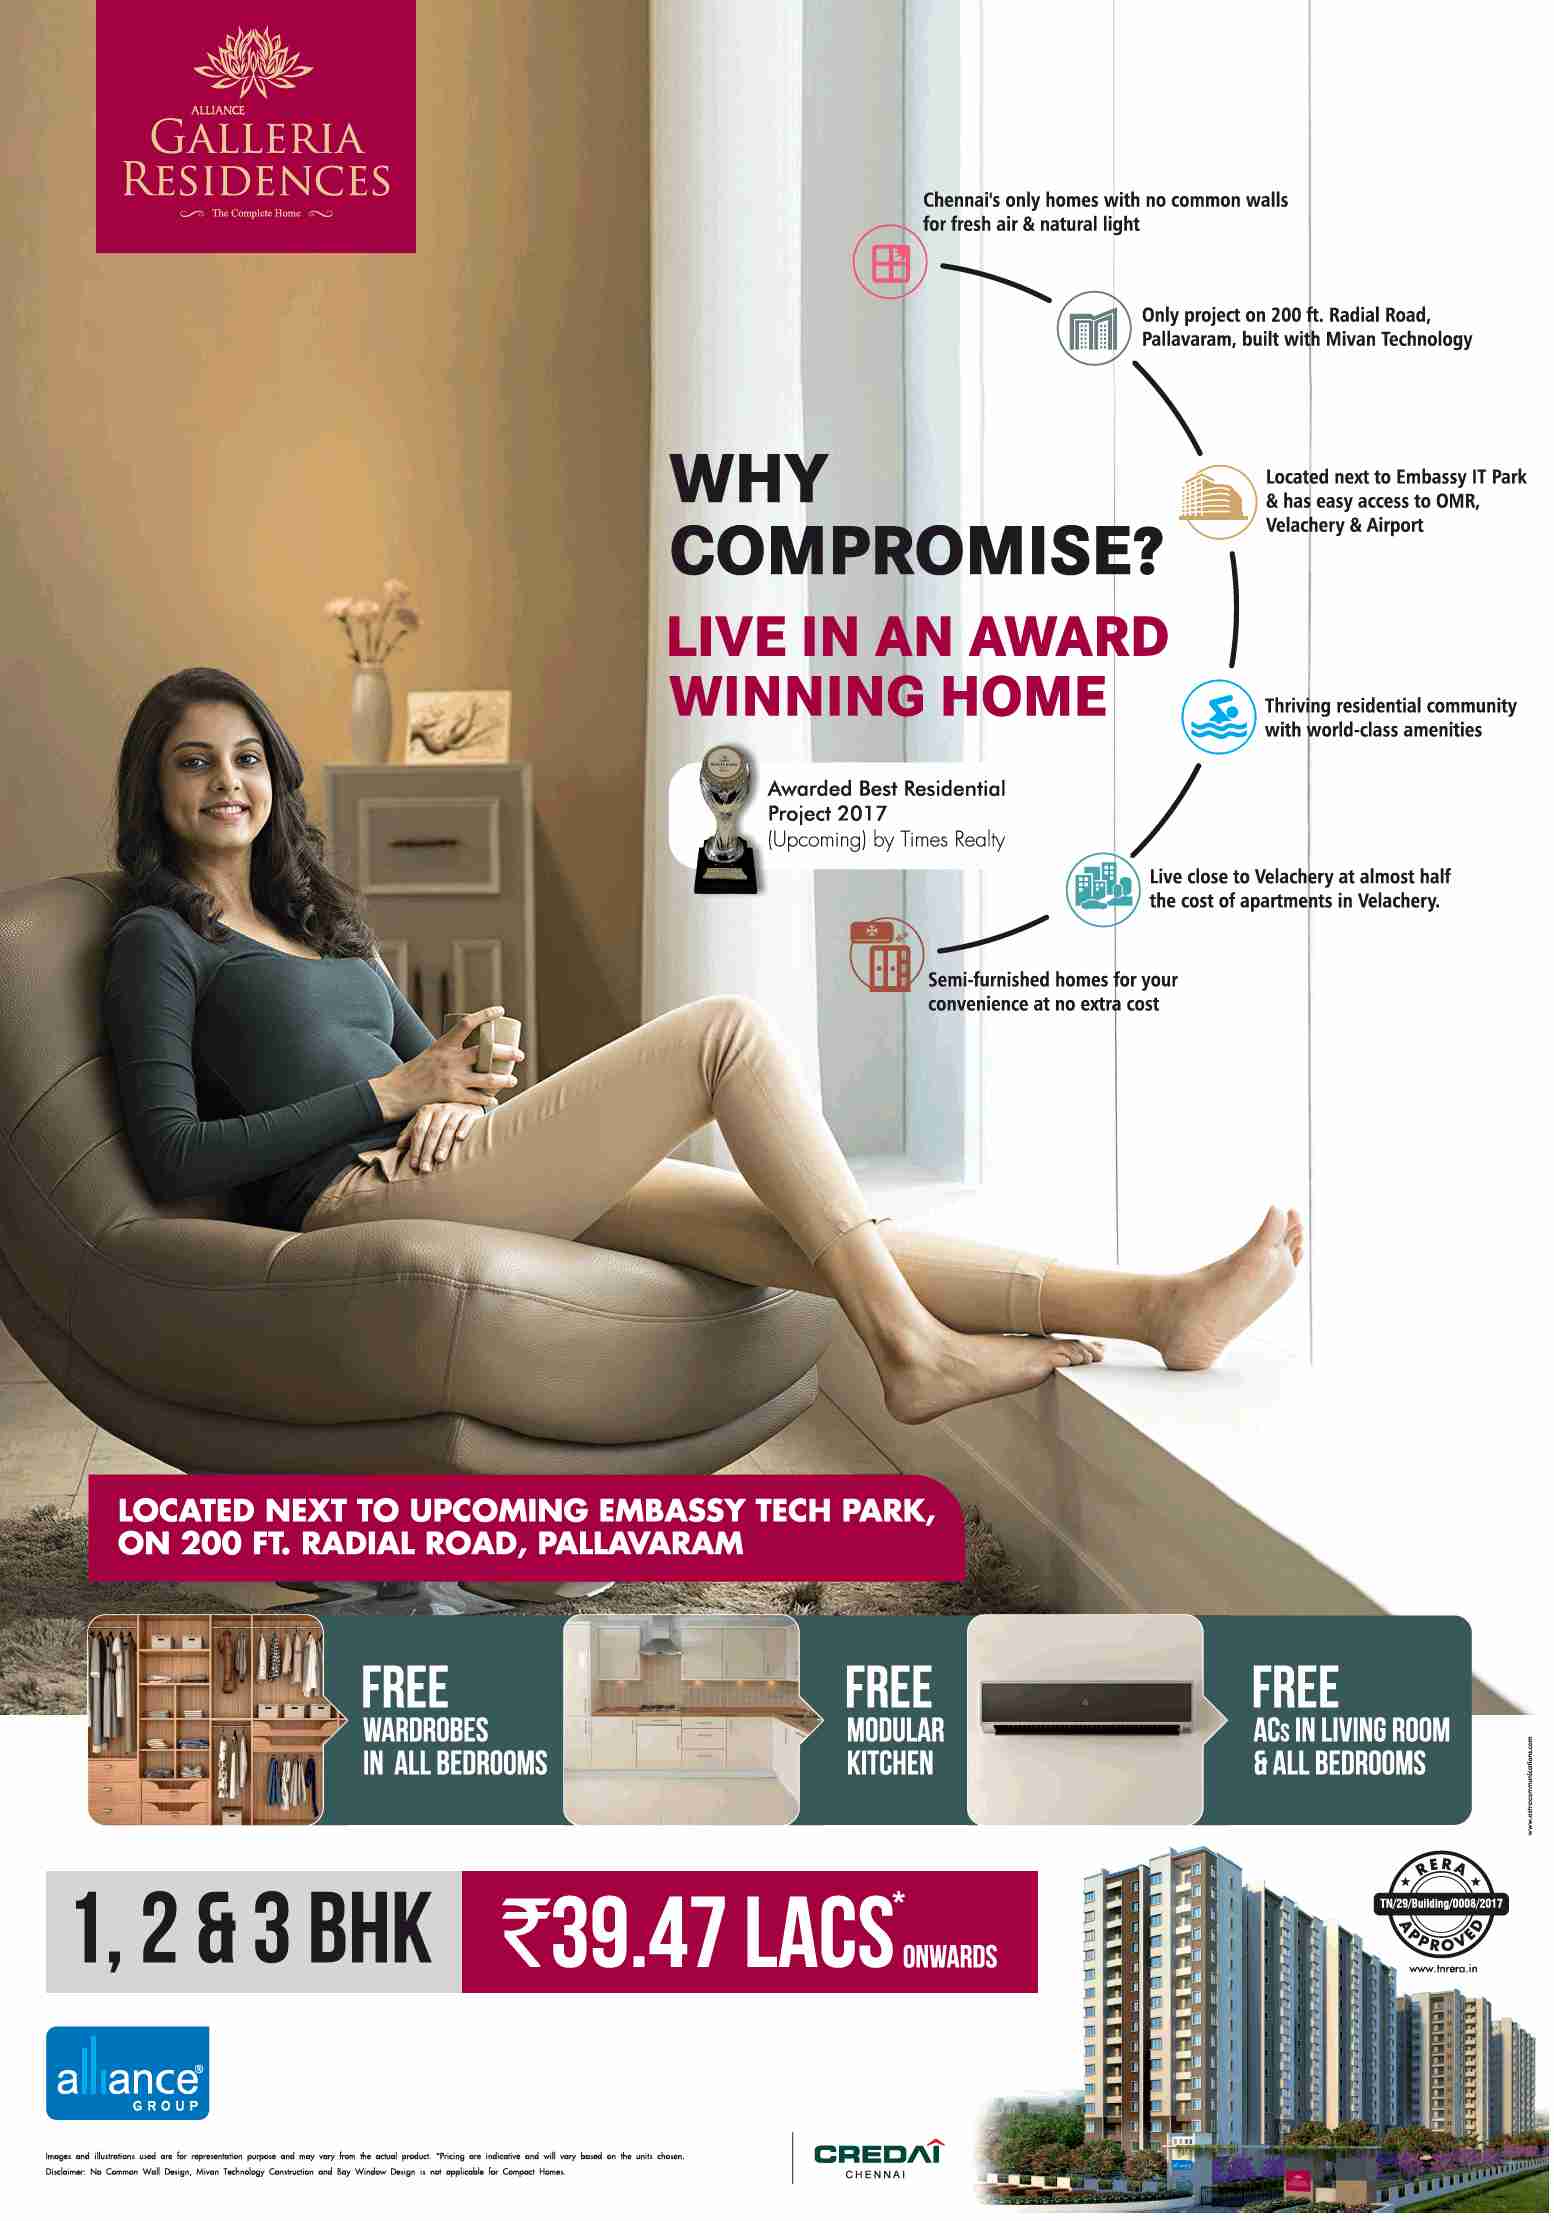 Live in award winning home at Alliance Galleria Residences in Chennai Update